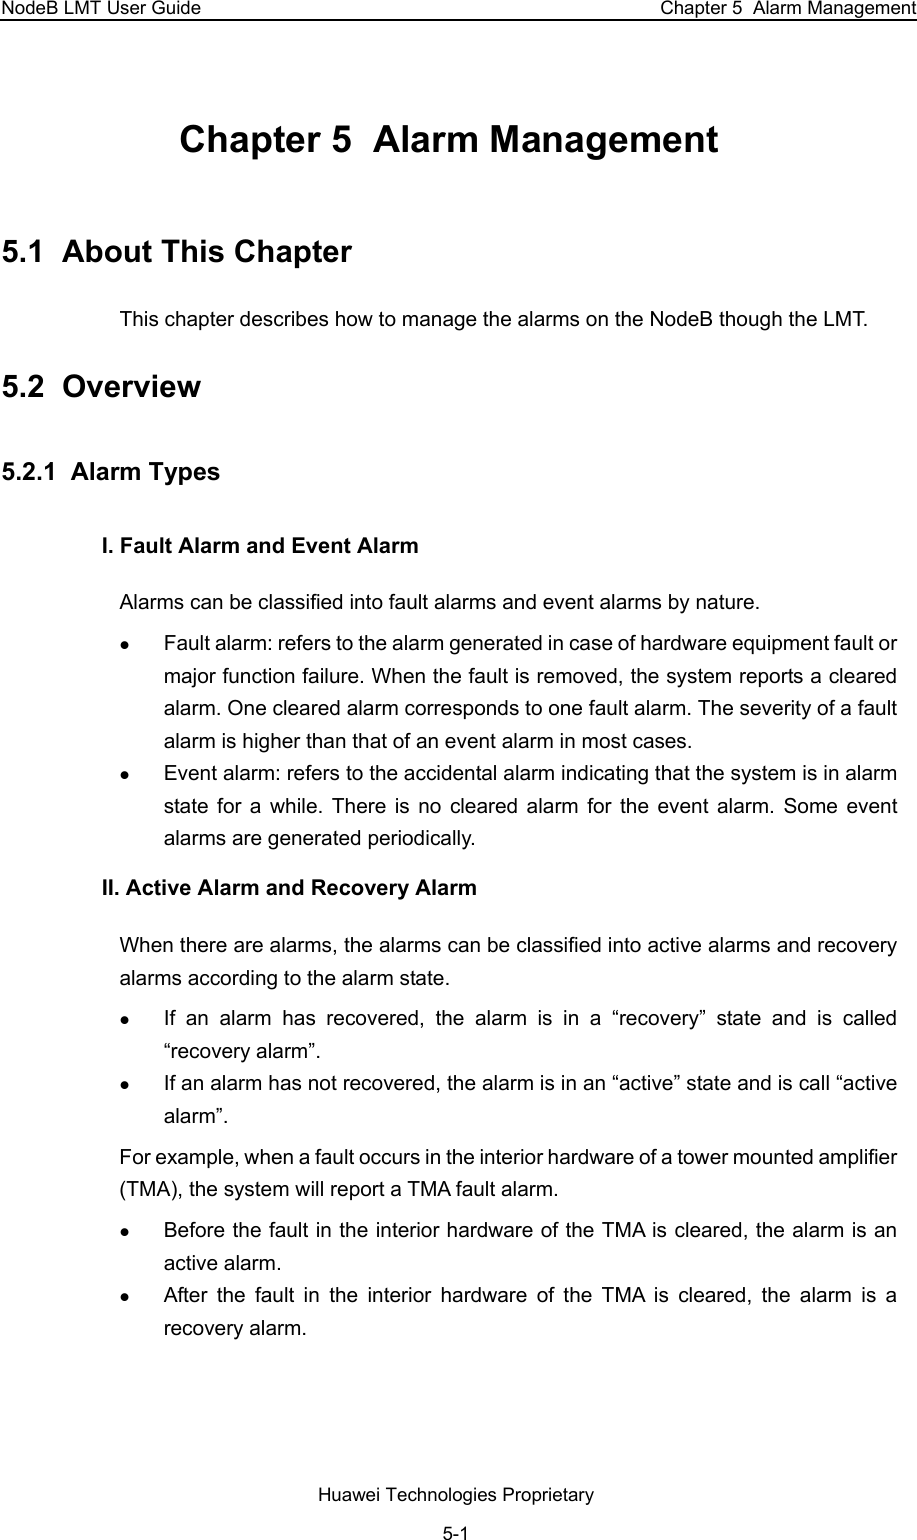 NodeB LMT User Guide  Chapter 5  Alarm Management Chapter 5  Alarm Management 5.1  About This Chapter This chapter describes how to manage the alarms on the NodeB though the LMT. 5.2  Overview 5.2.1  Alarm Types  I. Fault Alarm and Event Alarm Alarms can be classified into fault alarms and event alarms by nature. z Fault alarm: refers to the alarm generated in case of hardware equipment fault or major function failure. When the fault is removed, the system reports a cleared alarm. One cleared alarm corresponds to one fault alarm. The severity of a fault alarm is higher than that of an event alarm in most cases.  z Event alarm: refers to the accidental alarm indicating that the system is in alarm state for a while. There is no cleared alarm for the event alarm. Some event alarms are generated periodically. II. Active Alarm and Recovery Alarm When there are alarms, the alarms can be classified into active alarms and recovery alarms according to the alarm state. z If an alarm has recovered, the alarm is in a “recovery” state and is called “recovery alarm”. z If an alarm has not recovered, the alarm is in an “active” state and is call “active alarm”.  For example, when a fault occurs in the interior hardware of a tower mounted amplifier (TMA), the system will report a TMA fault alarm.  z Before the fault in the interior hardware of the TMA is cleared, the alarm is an active alarm. z After the fault in the interior hardware of the TMA is cleared, the alarm is a recovery alarm.  Huawei Technologies Proprietary 5-1 